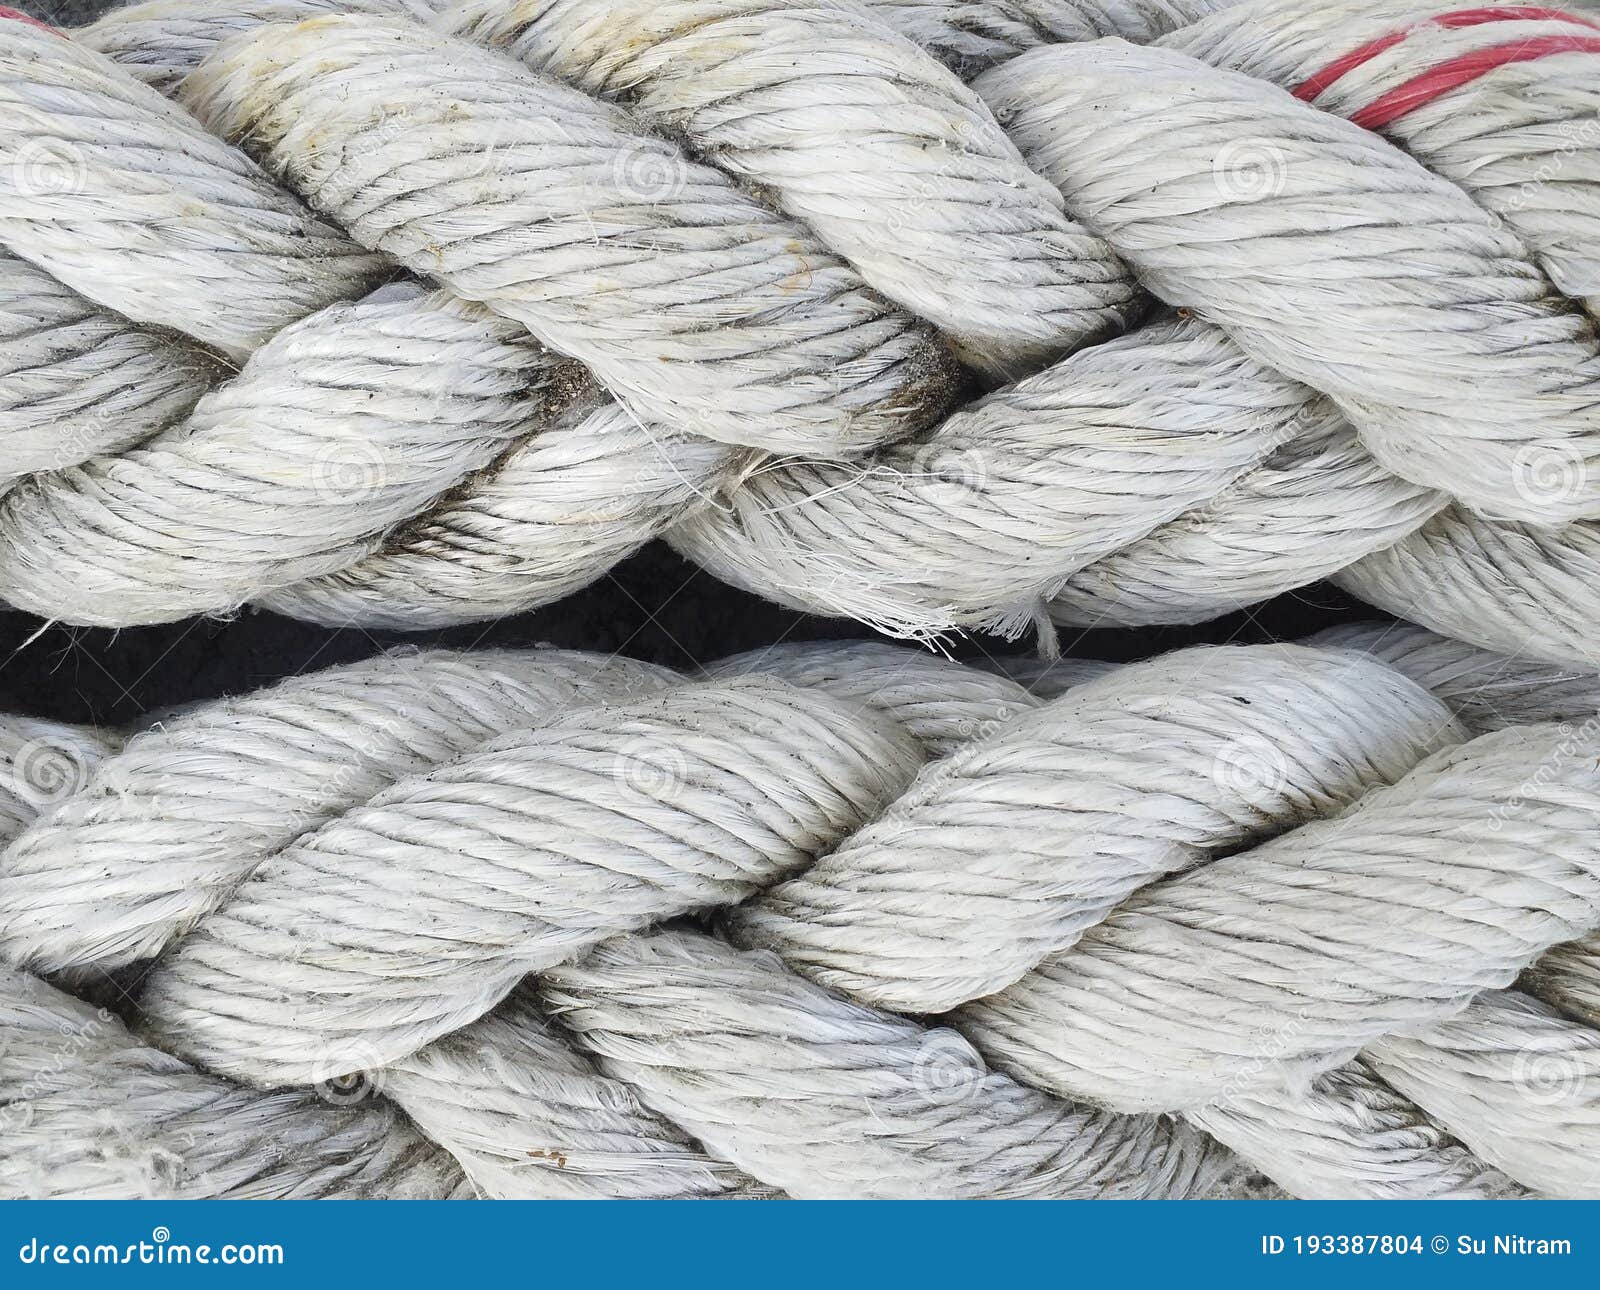 Background of Braided Old Thick Ropes. Sturdy Fishing Ropes To Tie